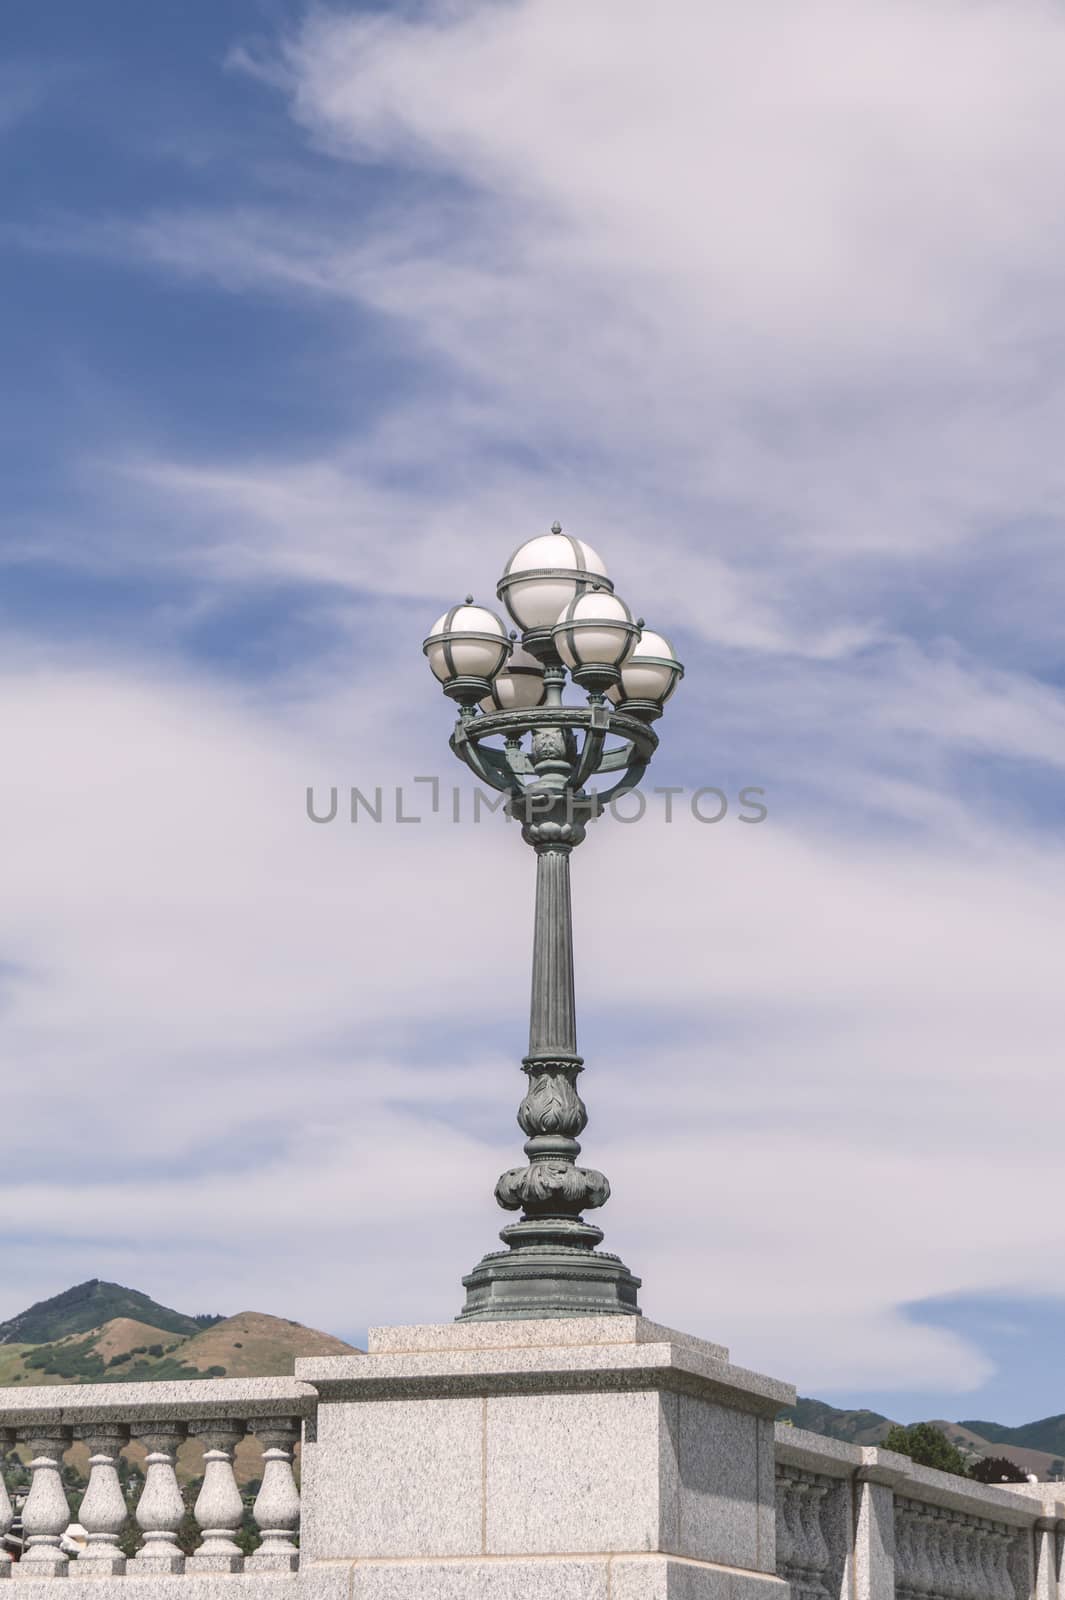 Ancient street lamp with white spheres by Sportactive